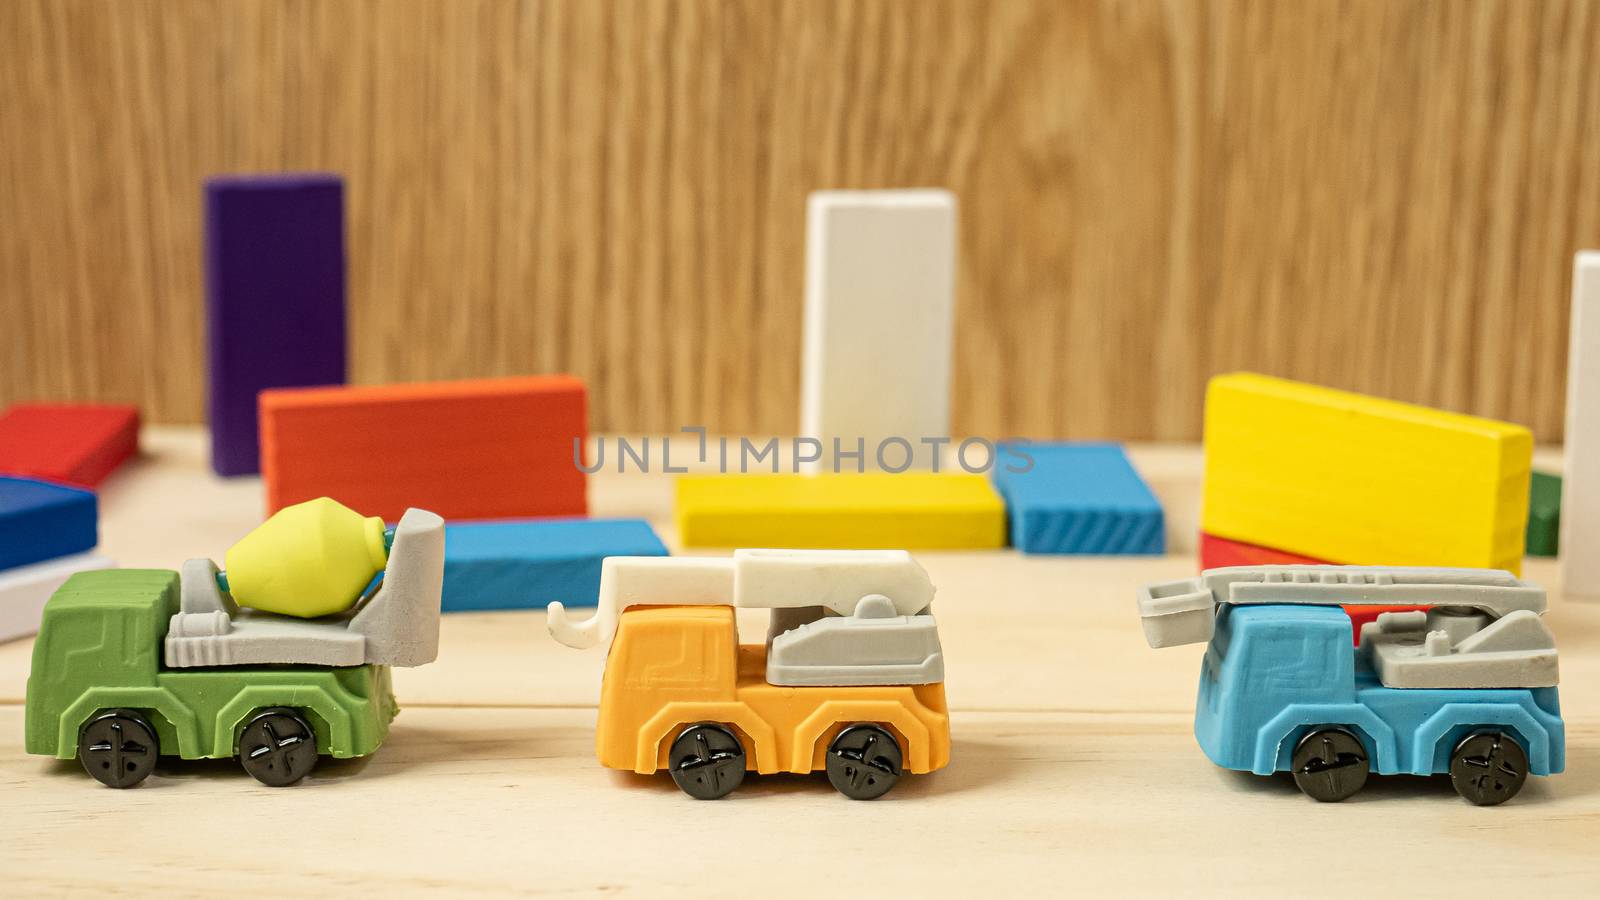 The truck building toy multi colour  for property and building content